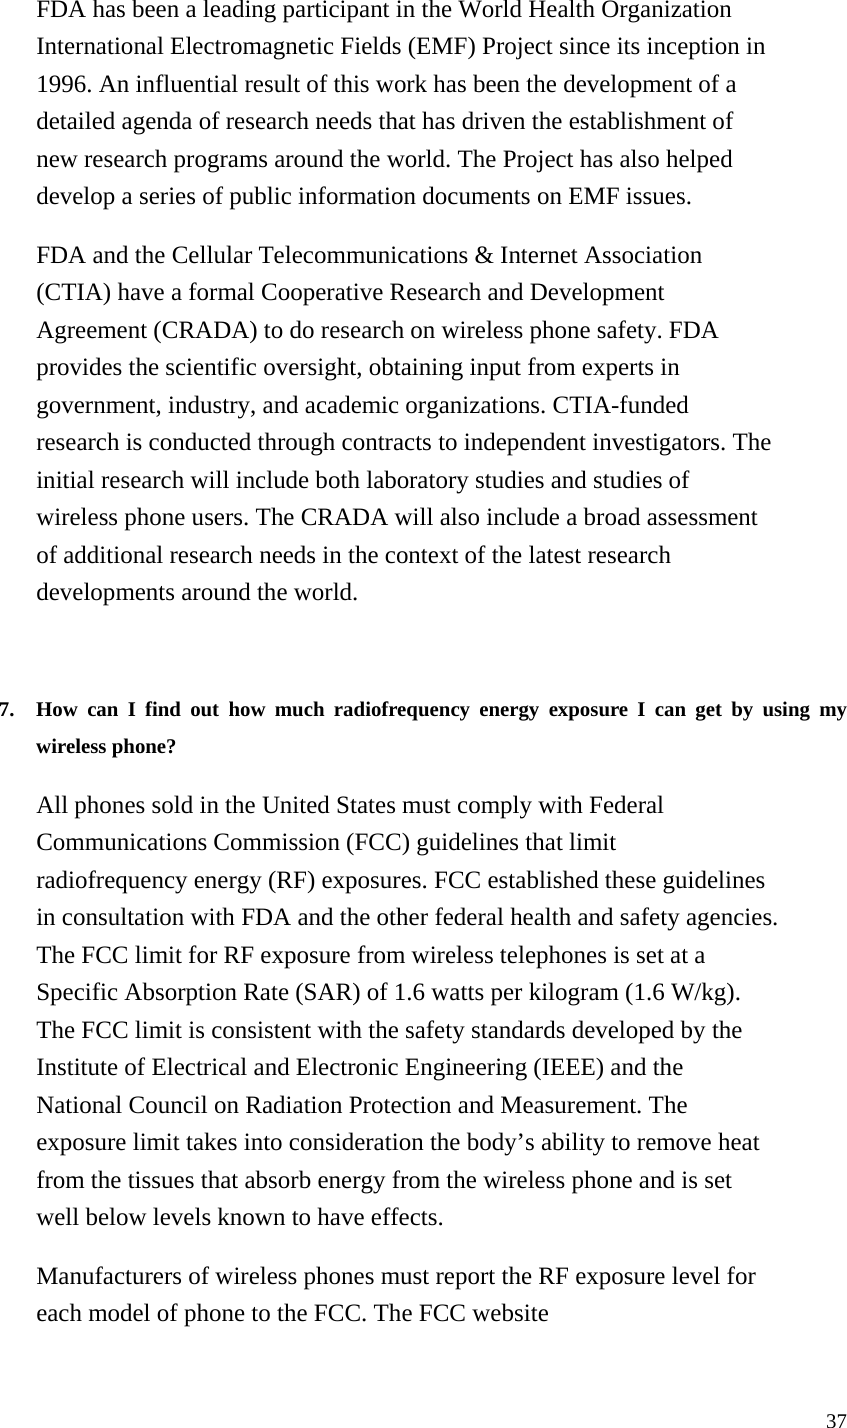 37 FDA has been a leading participant in the World Health Organization International Electromagnetic Fields (EMF) Project since its inception in 1996. An influential result of this work has been the development of a detailed agenda of research needs that has driven the establishment of new research programs around the world. The Project has also helped develop a series of public information documents on EMF issues. FDA and the Cellular Telecommunications &amp; Internet Association (CTIA) have a formal Cooperative Research and Development Agreement (CRADA) to do research on wireless phone safety. FDA provides the scientific oversight, obtaining input from experts in government, industry, and academic organizations. CTIA-funded research is conducted through contracts to independent investigators. The initial research will include both laboratory studies and studies of wireless phone users. The CRADA will also include a broad assessment of additional research needs in the context of the latest research developments around the world.   7. How can I find out how much radiofrequency energy exposure I can get by using my wireless phone?   All phones sold in the United States must comply with Federal Communications Commission (FCC) guidelines that limit radiofrequency energy (RF) exposures. FCC established these guidelines in consultation with FDA and the other federal health and safety agencies. The FCC limit for RF exposure from wireless telephones is set at a Specific Absorption Rate (SAR) of 1.6 watts per kilogram (1.6 W/kg). The FCC limit is consistent with the safety standards developed by the Institute of Electrical and Electronic Engineering (IEEE) and the National Council on Radiation Protection and Measurement. The exposure limit takes into consideration the body’s ability to remove heat from the tissues that absorb energy from the wireless phone and is set well below levels known to have effects. Manufacturers of wireless phones must report the RF exposure level for each model of phone to the FCC. The FCC website 